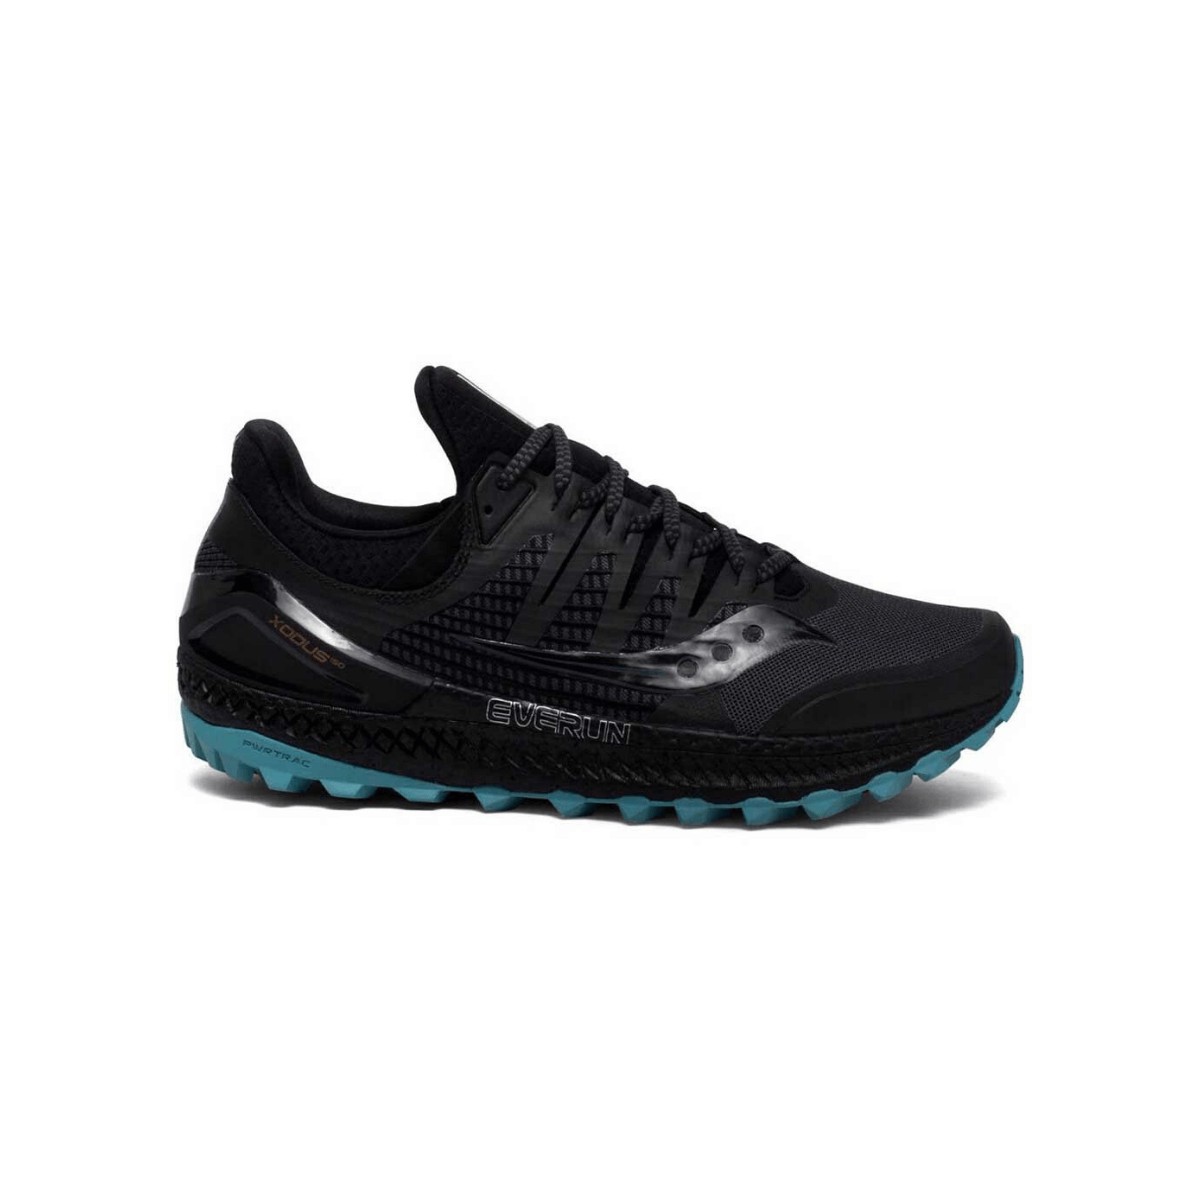 Saucony Xodus ISO 3 Grey Black Blue SS19 Men's Running Shoes